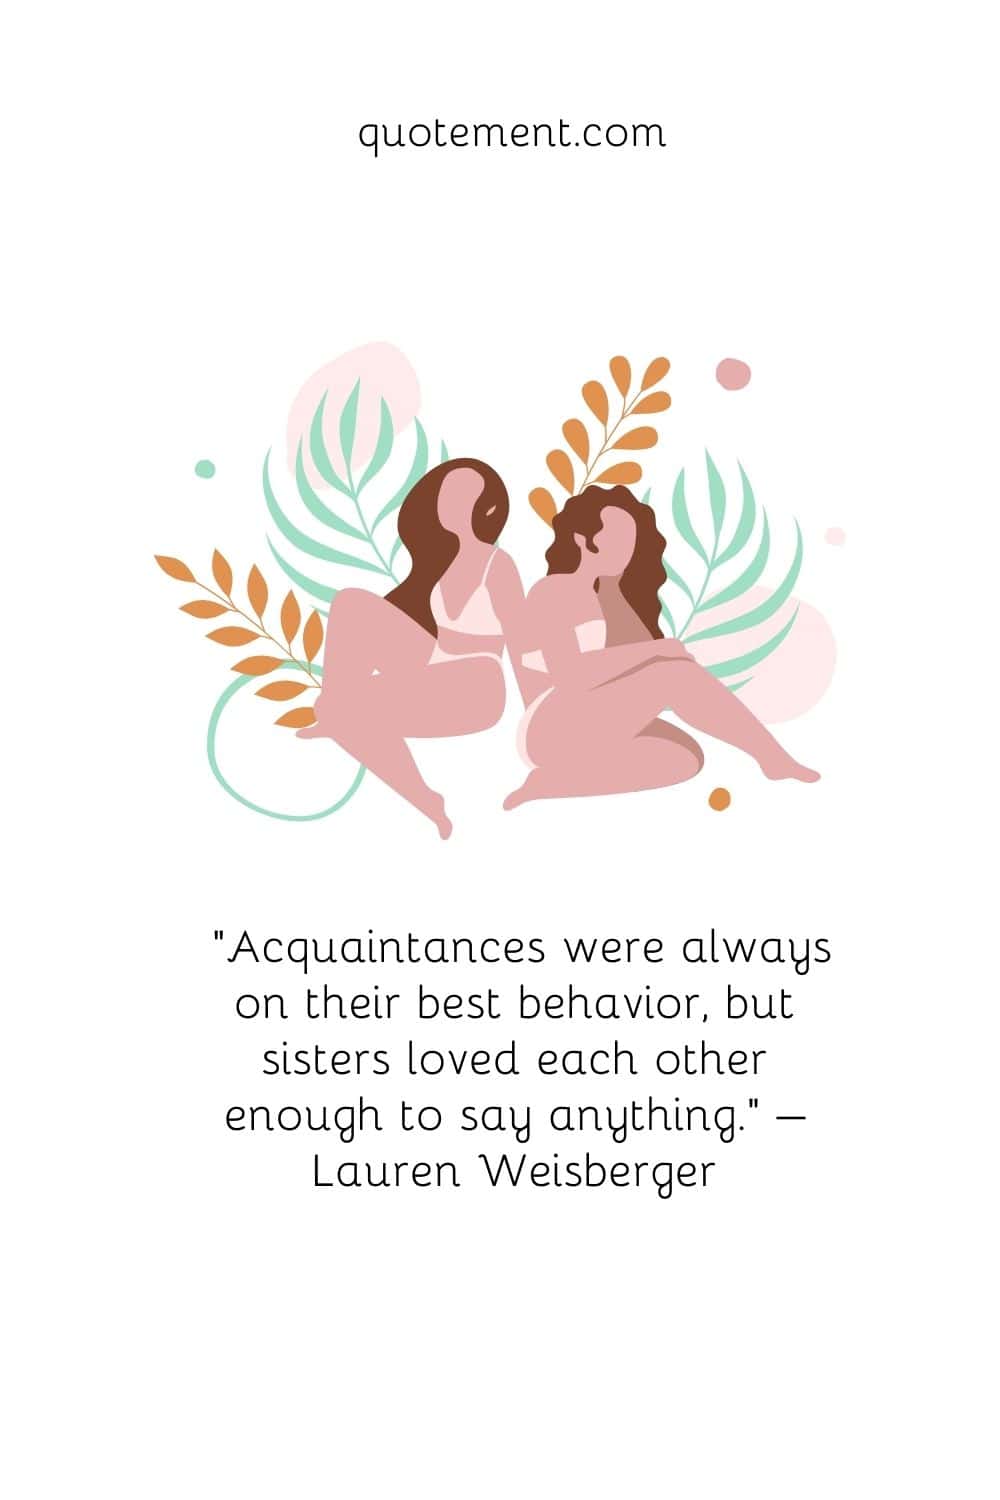 “Acquaintances were always on their best behavior, but sisters loved each other enough to say anything.” – Lauren Weisberger